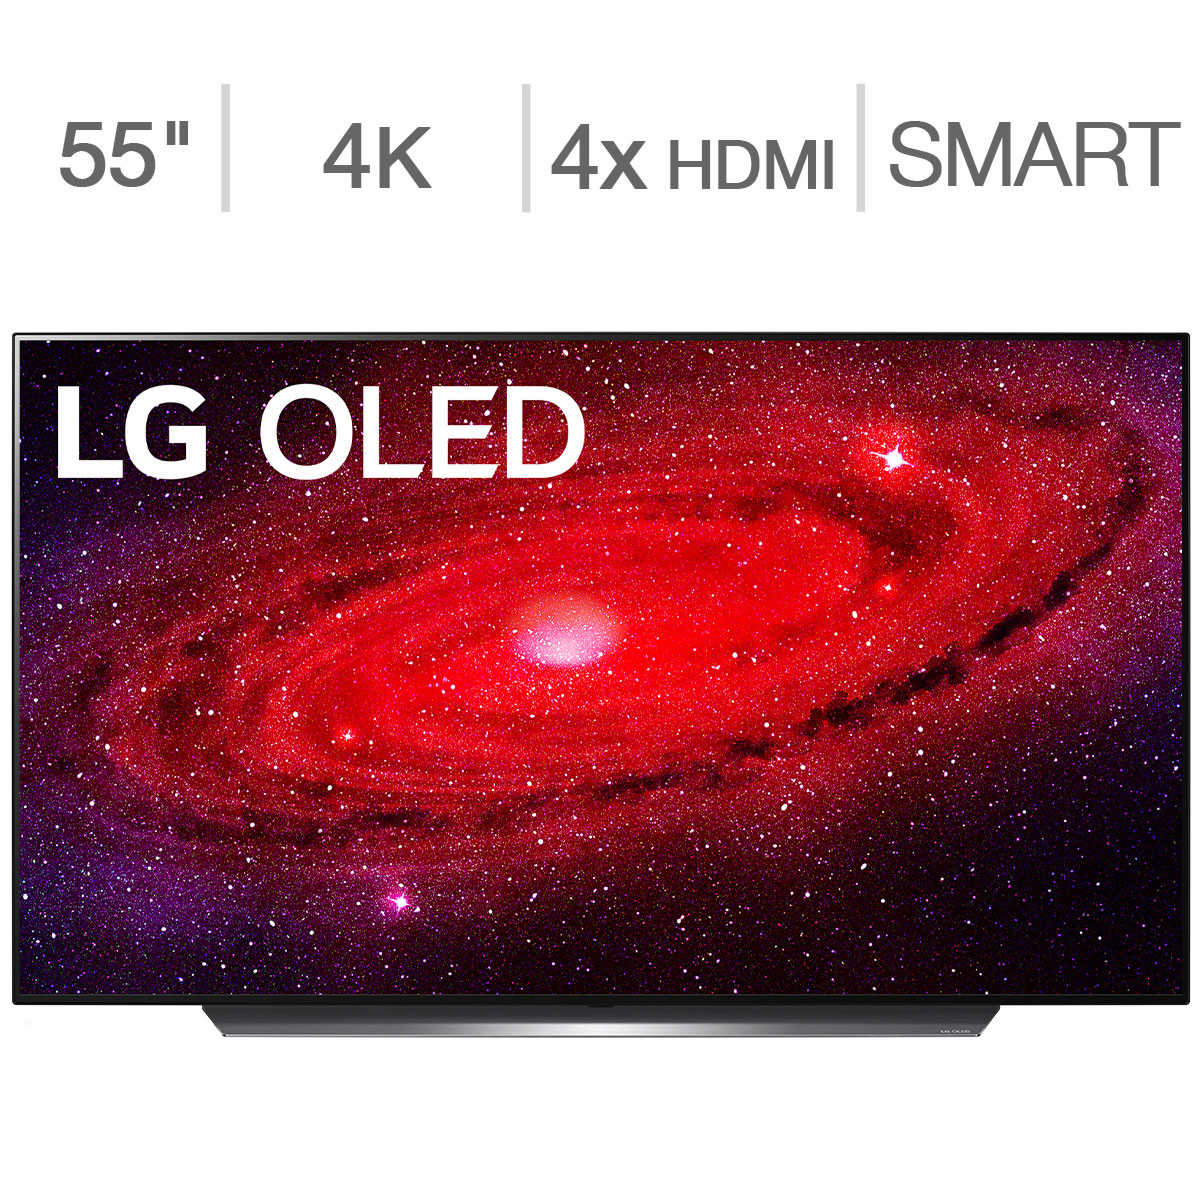 Lg 55 Class Cx Series 4k Uhd Oled Tv 100 Allstate Protection Plan Bundle Included Costco